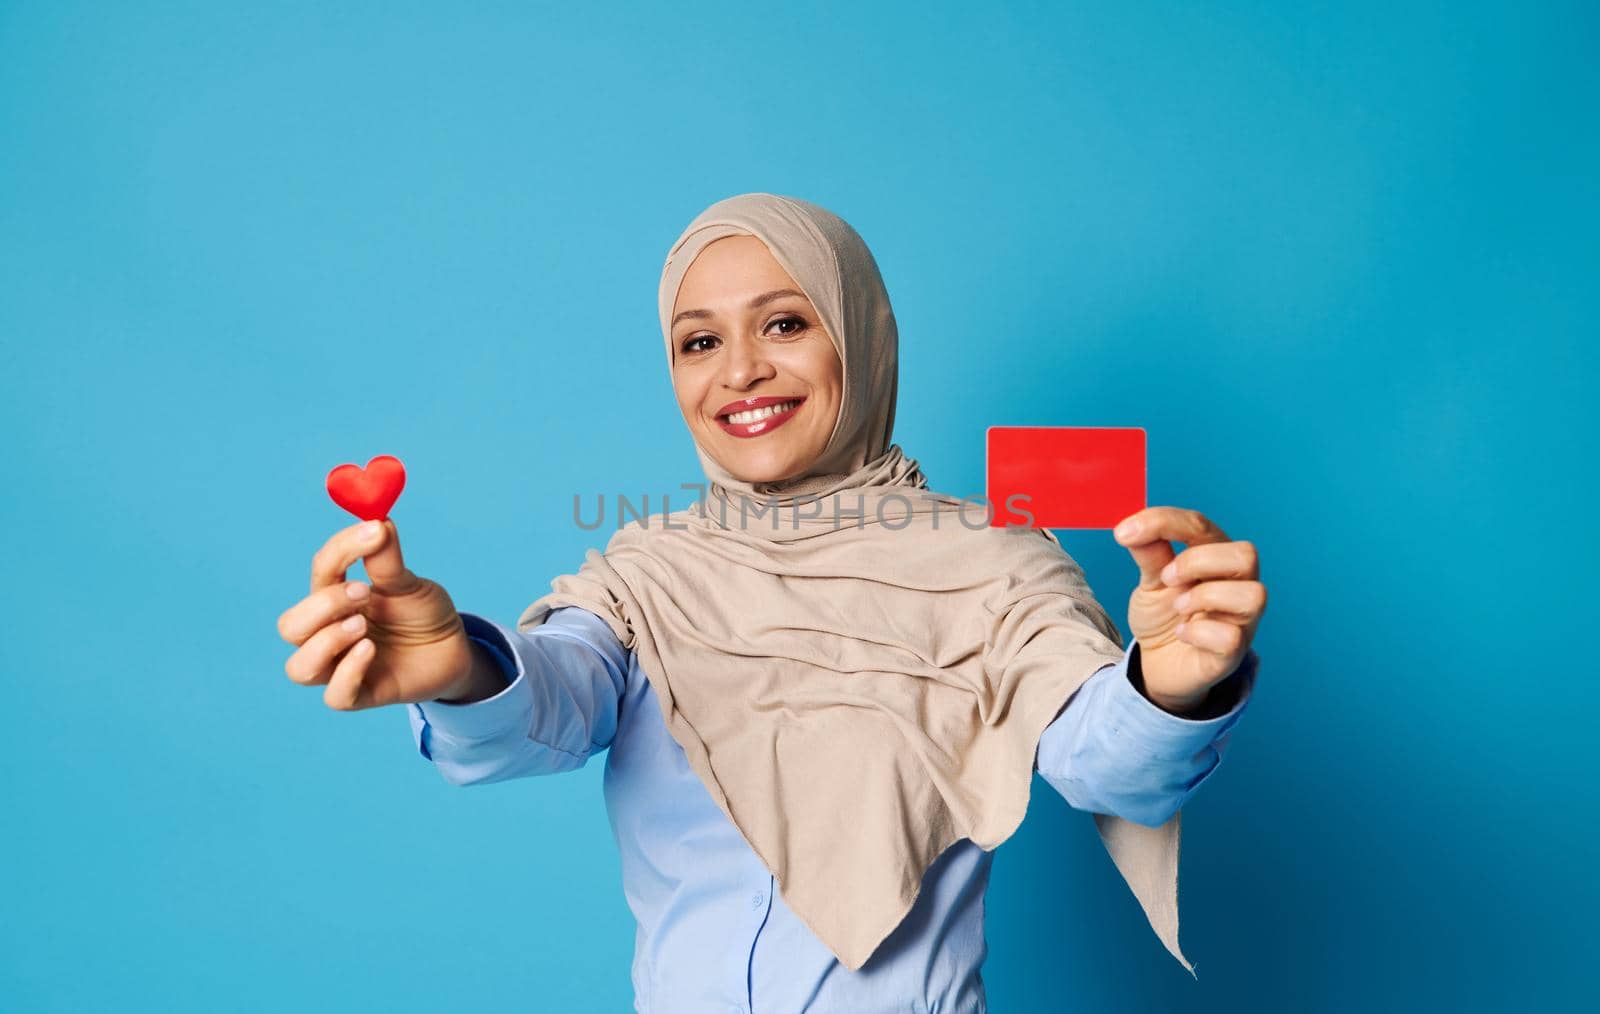 Smiling oriental woman in hijab showing a shape of red heart and blank red plastic card, smiling looking at camera while posing against blue background with copy space